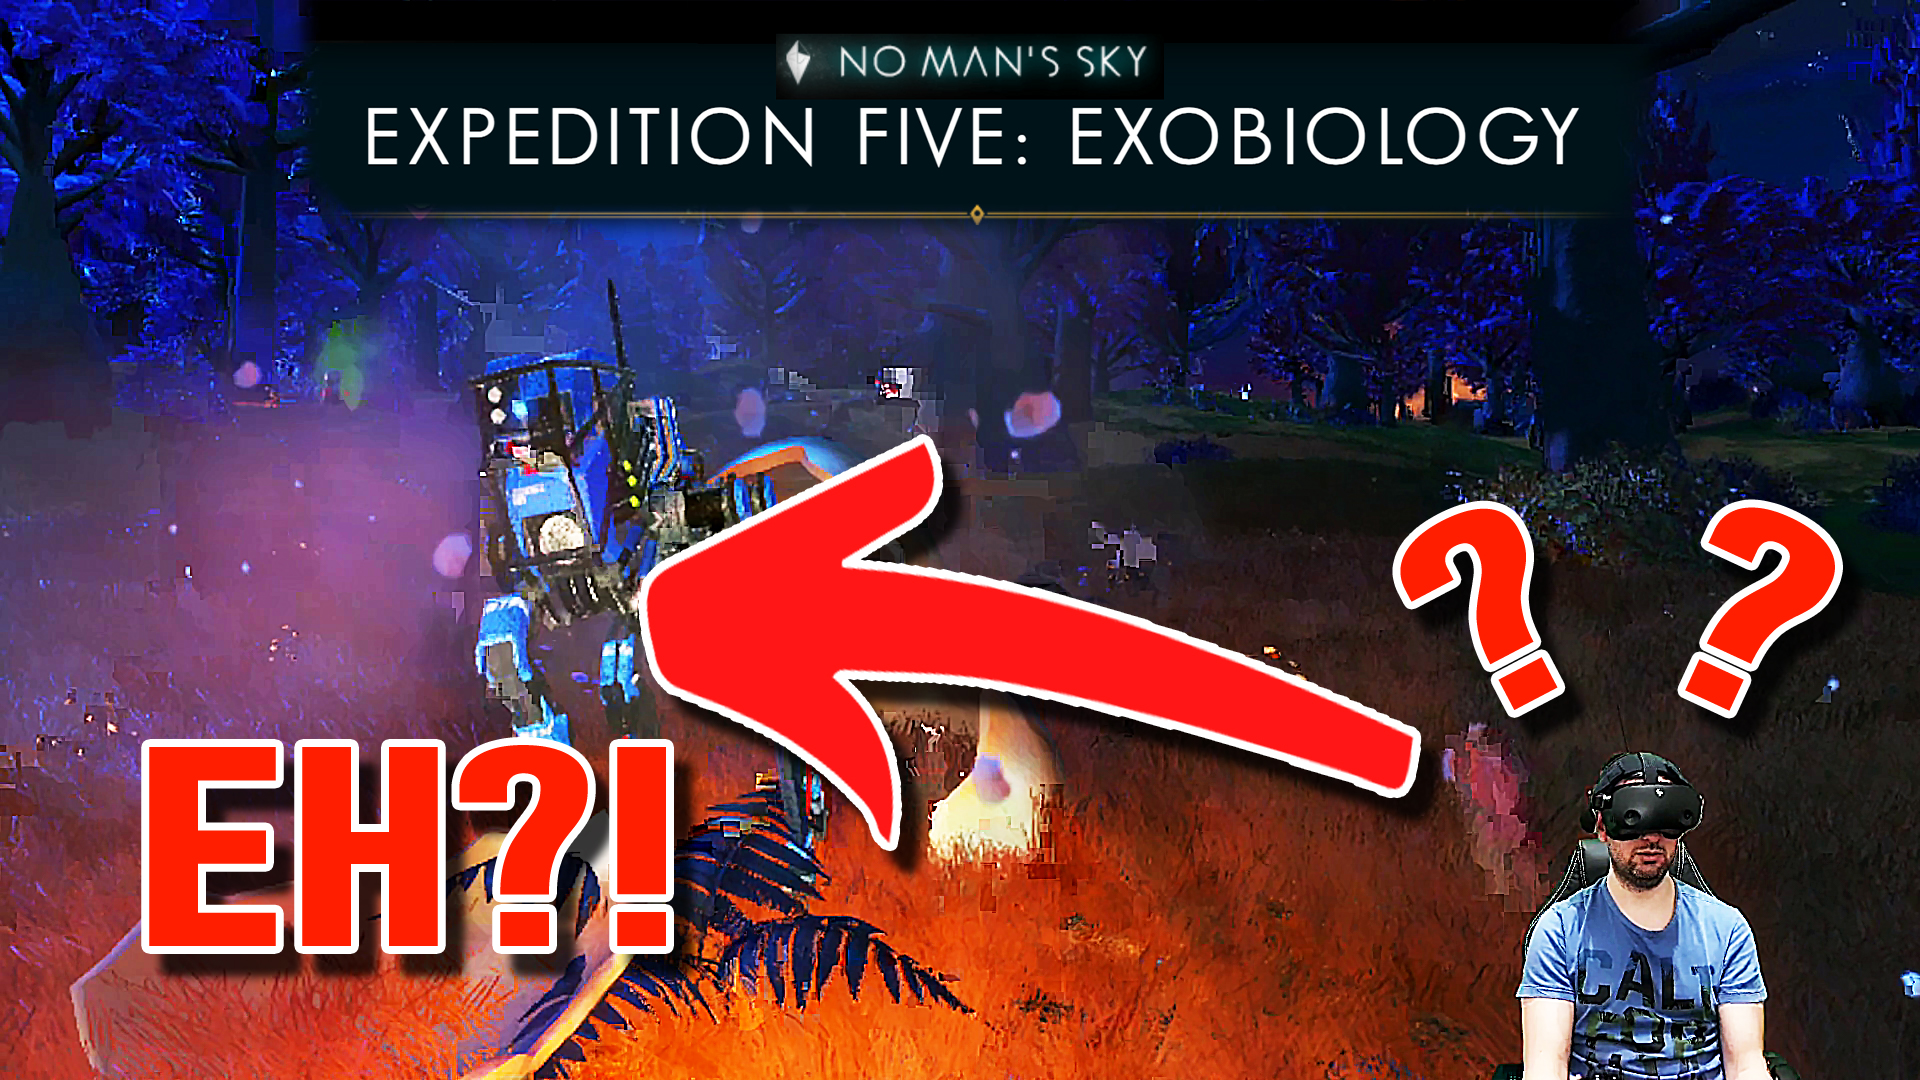 No Man’s Sky Expedition 5: EXOBIOLOGY in VR, gameplay, trucchi e consigli